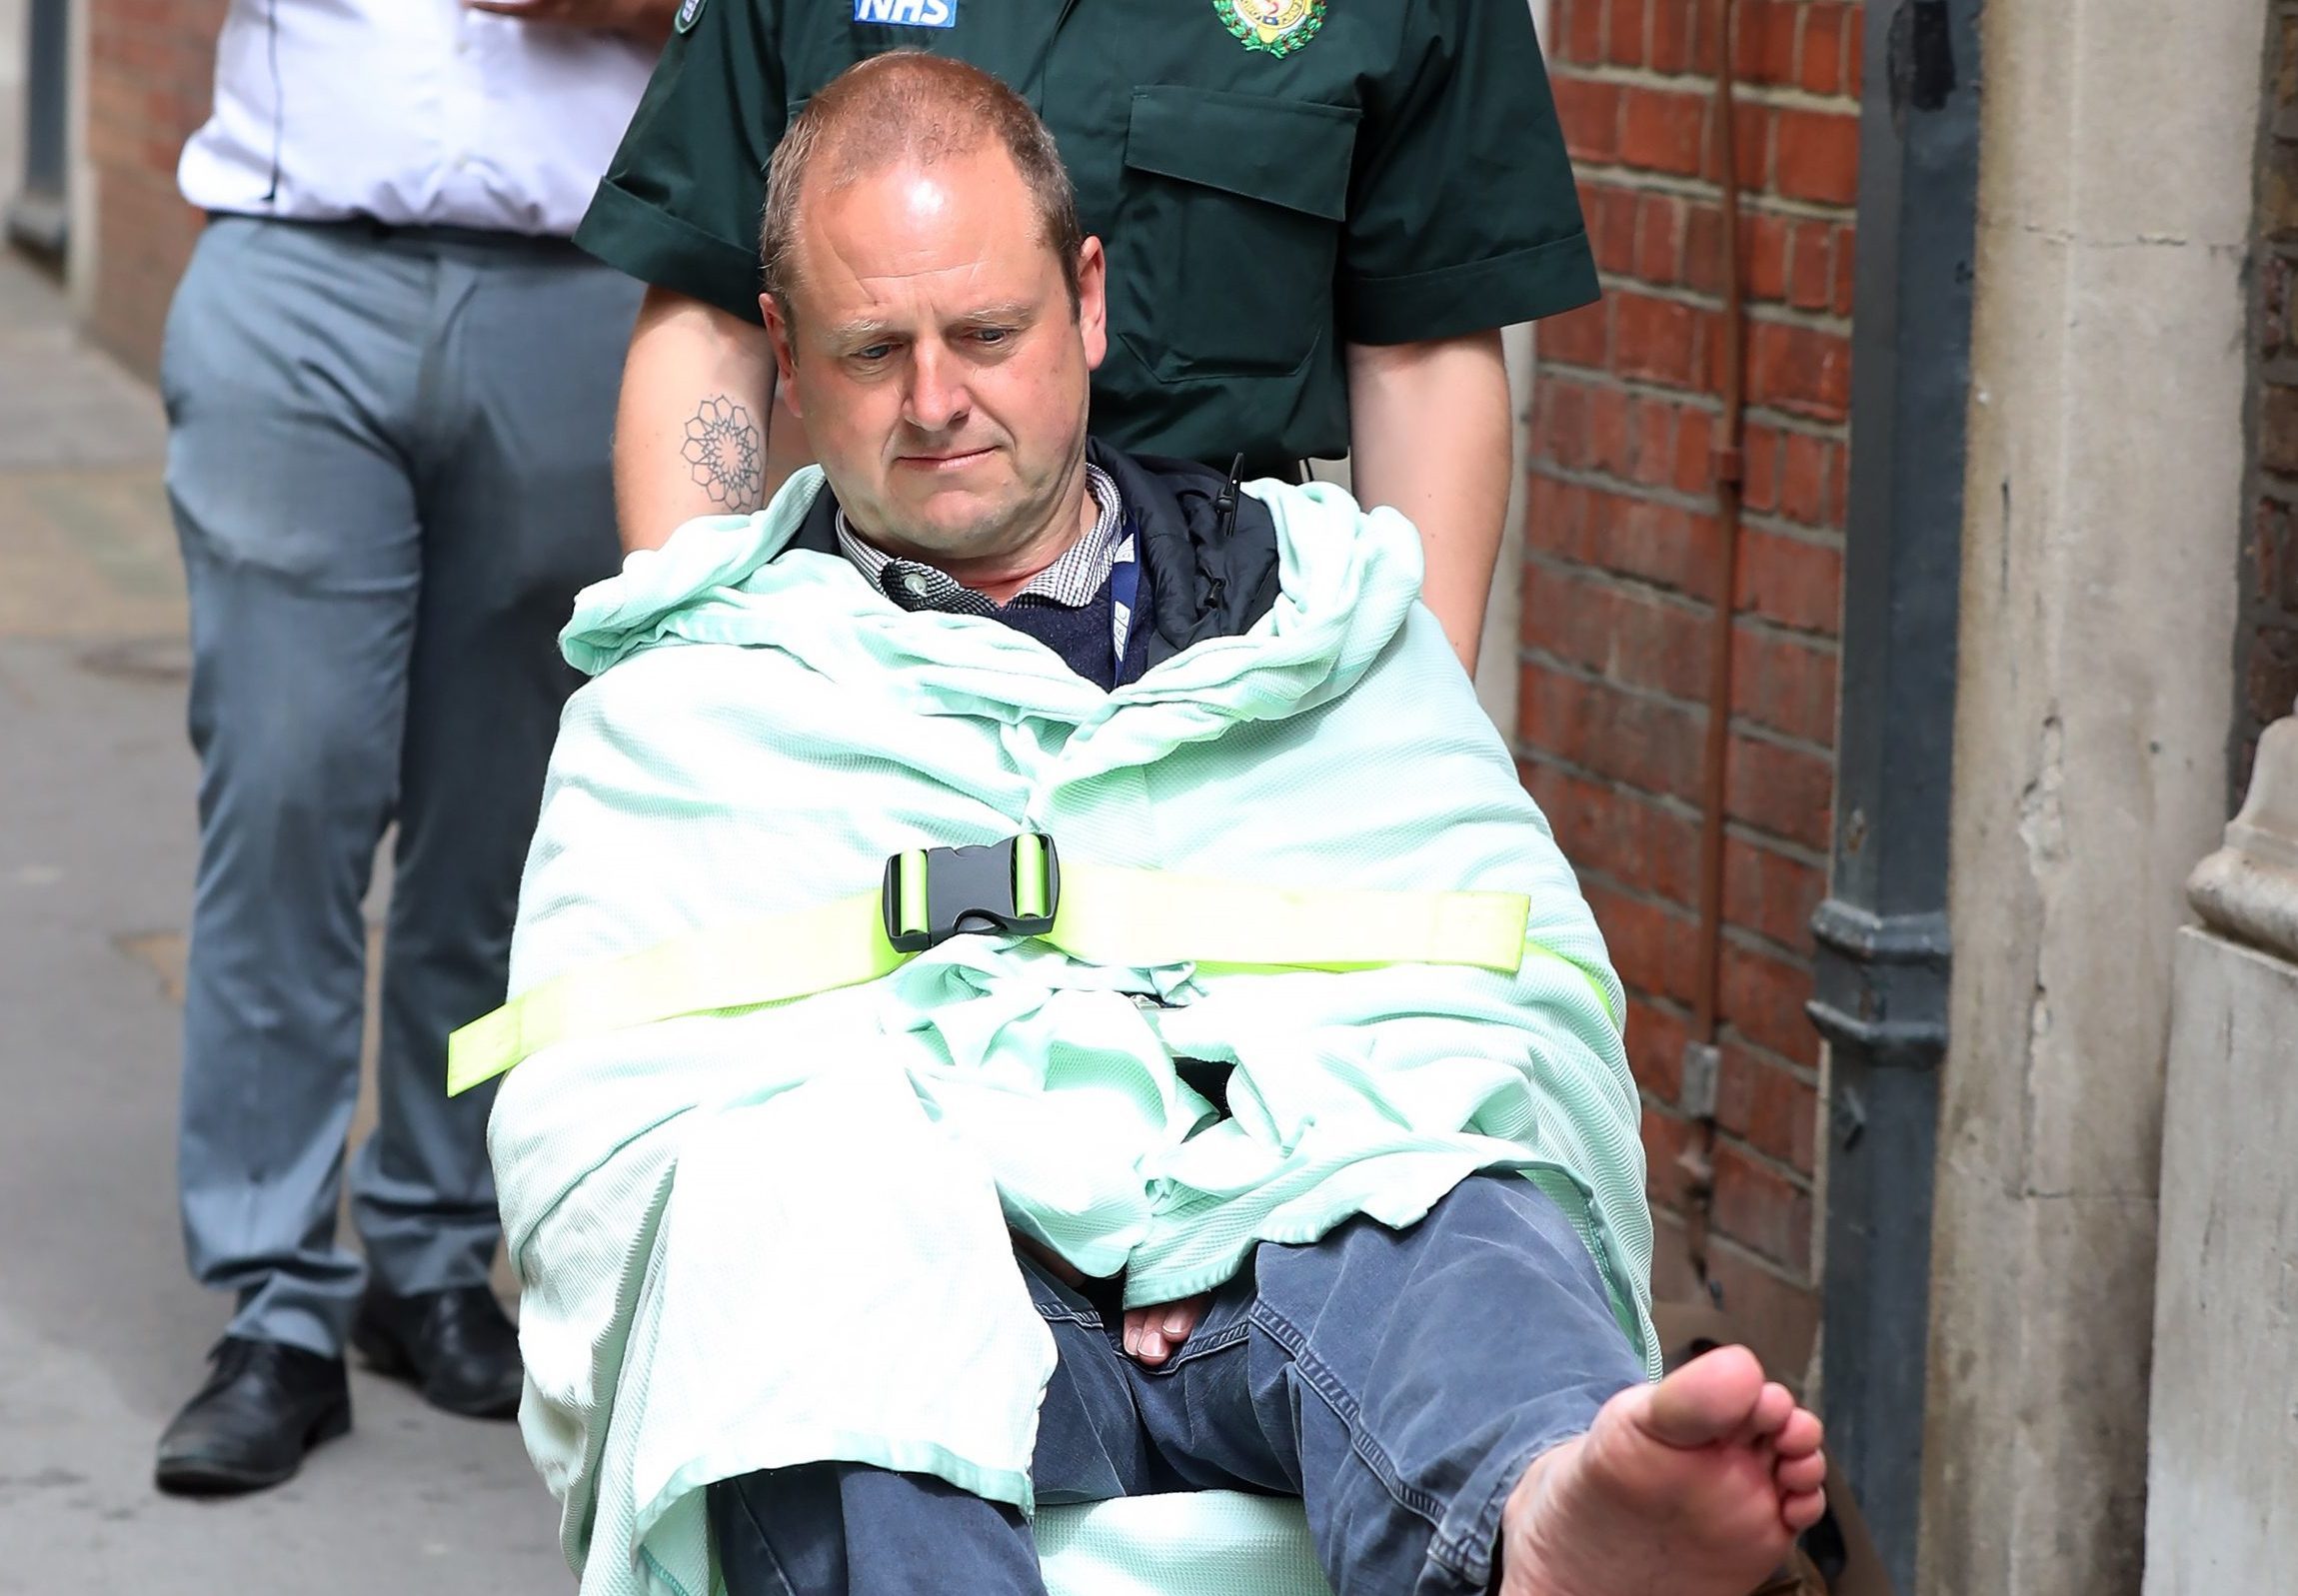 BBC Cameraman Giles Wooltorton is helped by Ambulance staff after reportedly being hit by Labour Leader Jeremy Corbyn's vehicle outside Savoy Place (Neil P. Mockford/Getty Images)